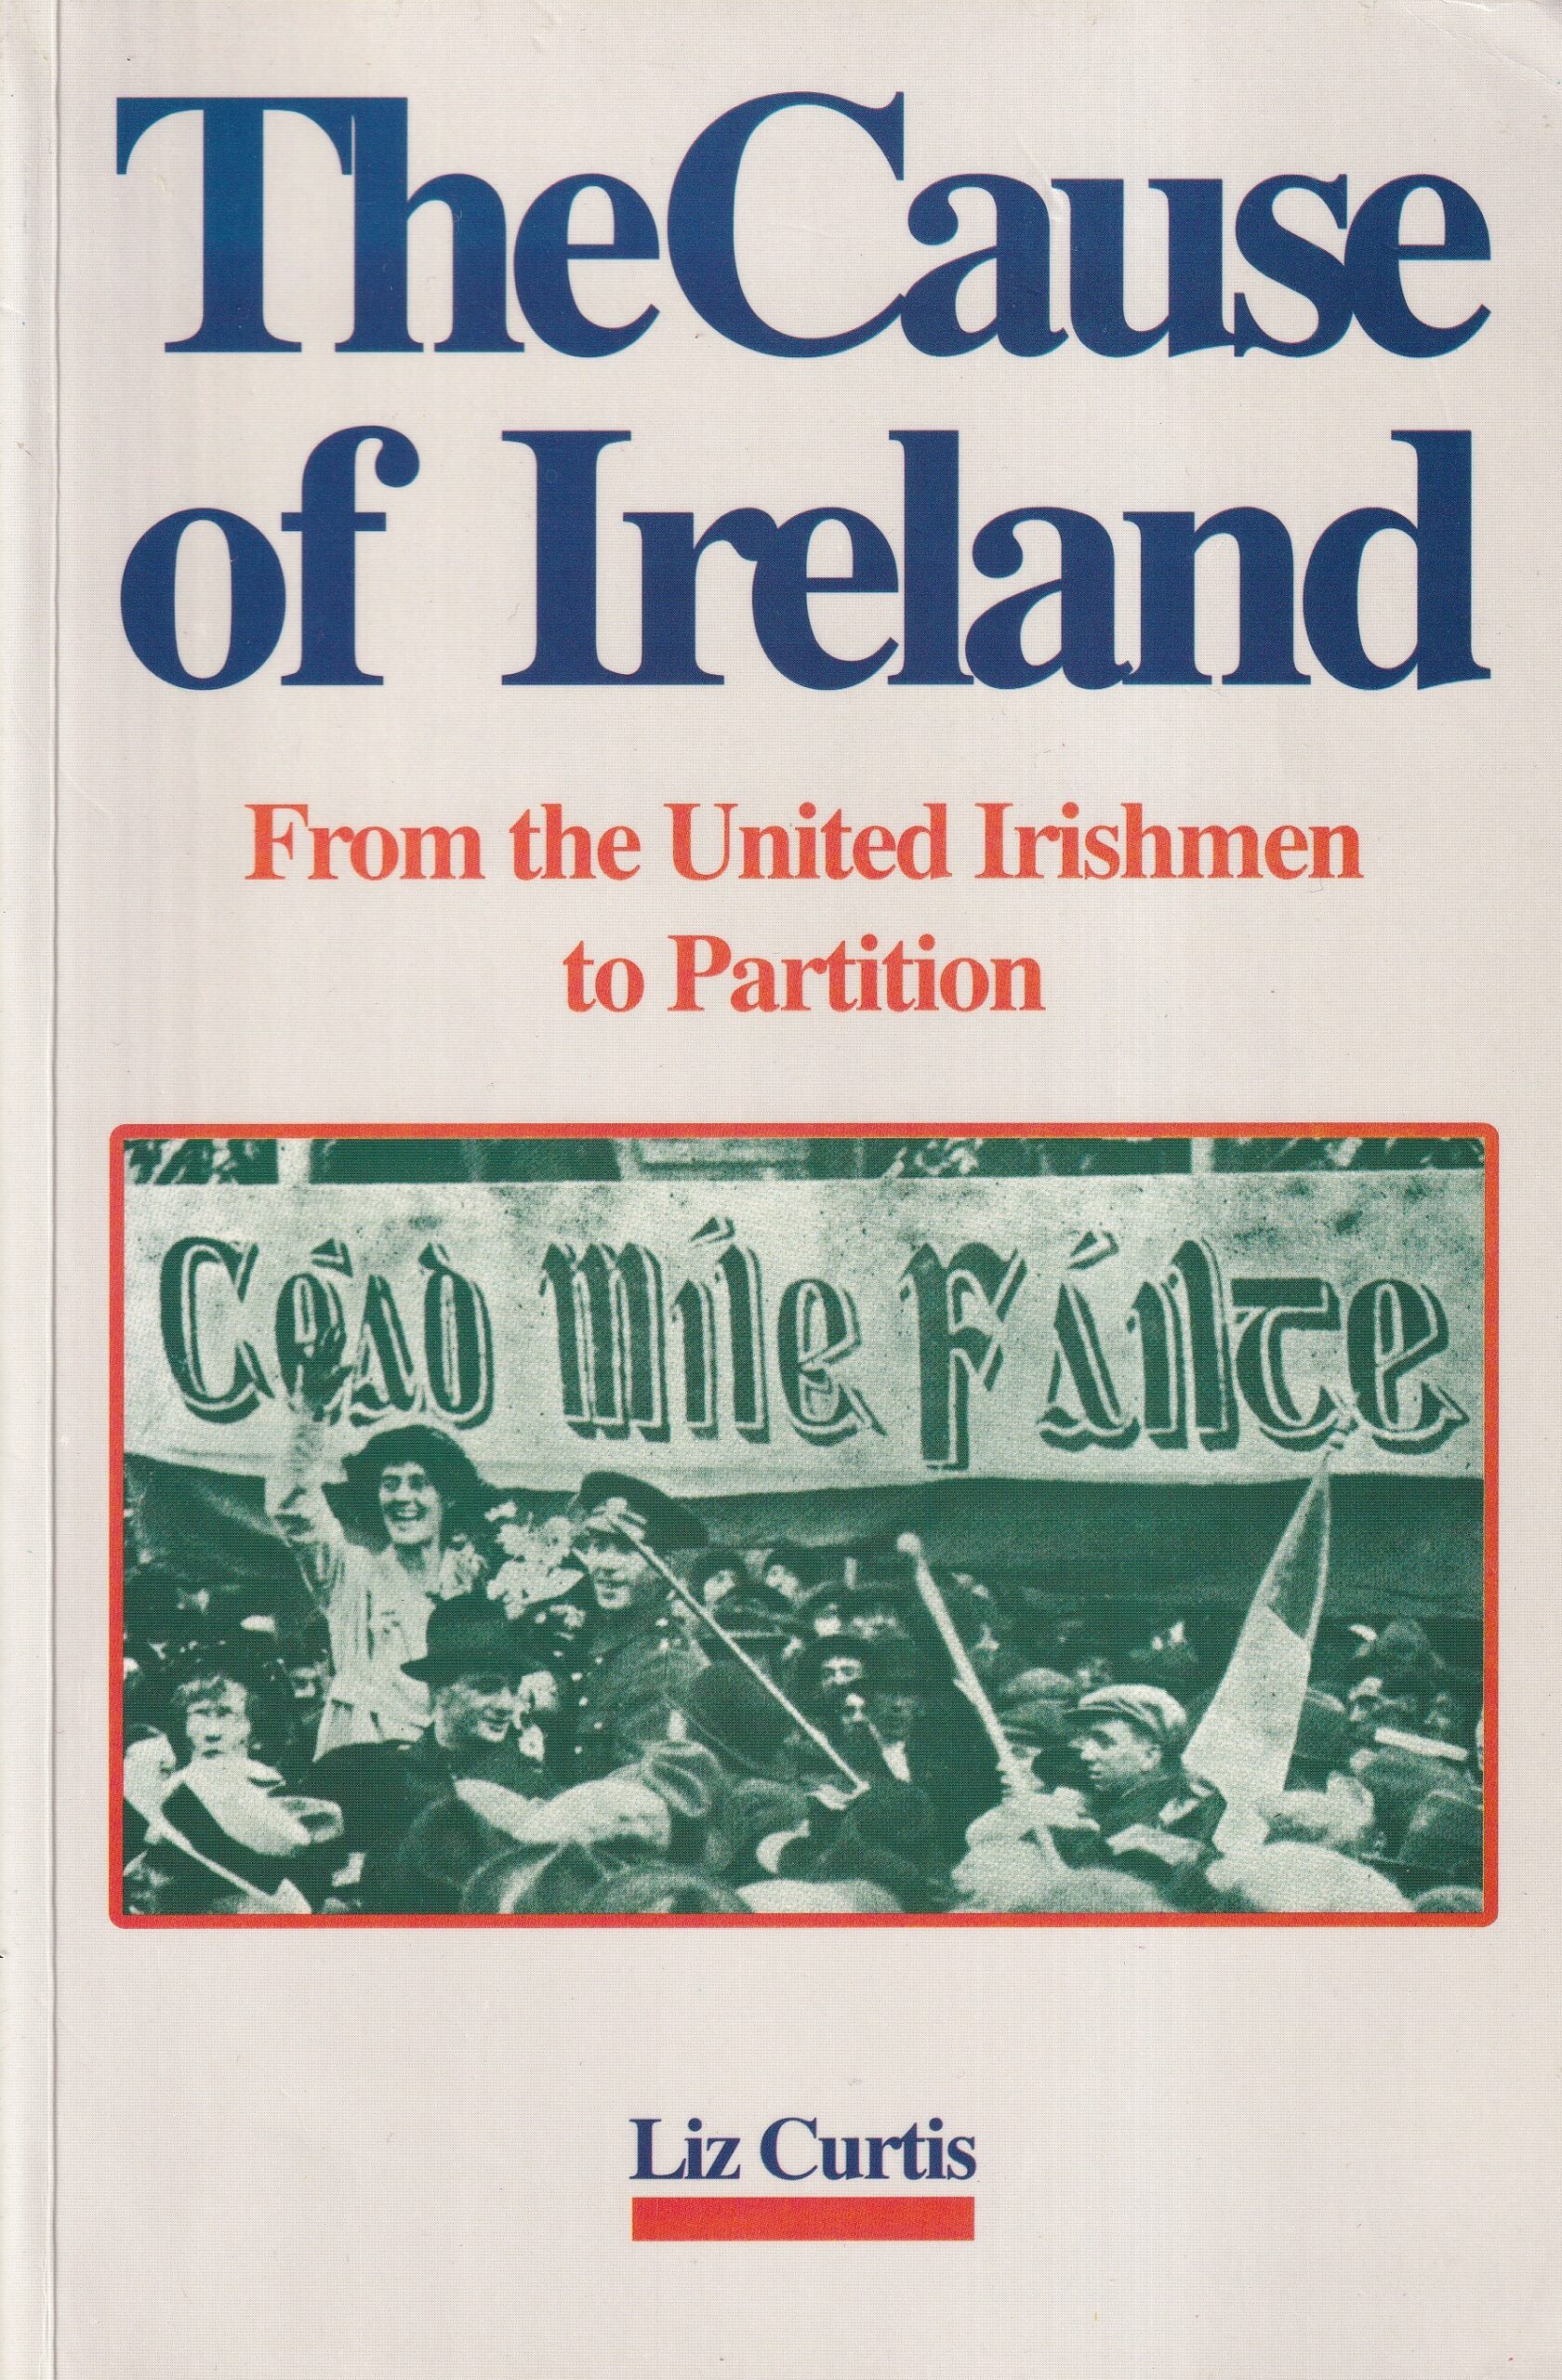 The Cause of Ireland: From the United Irishmen to Partition | Liz Curtis | Charlie Byrne's